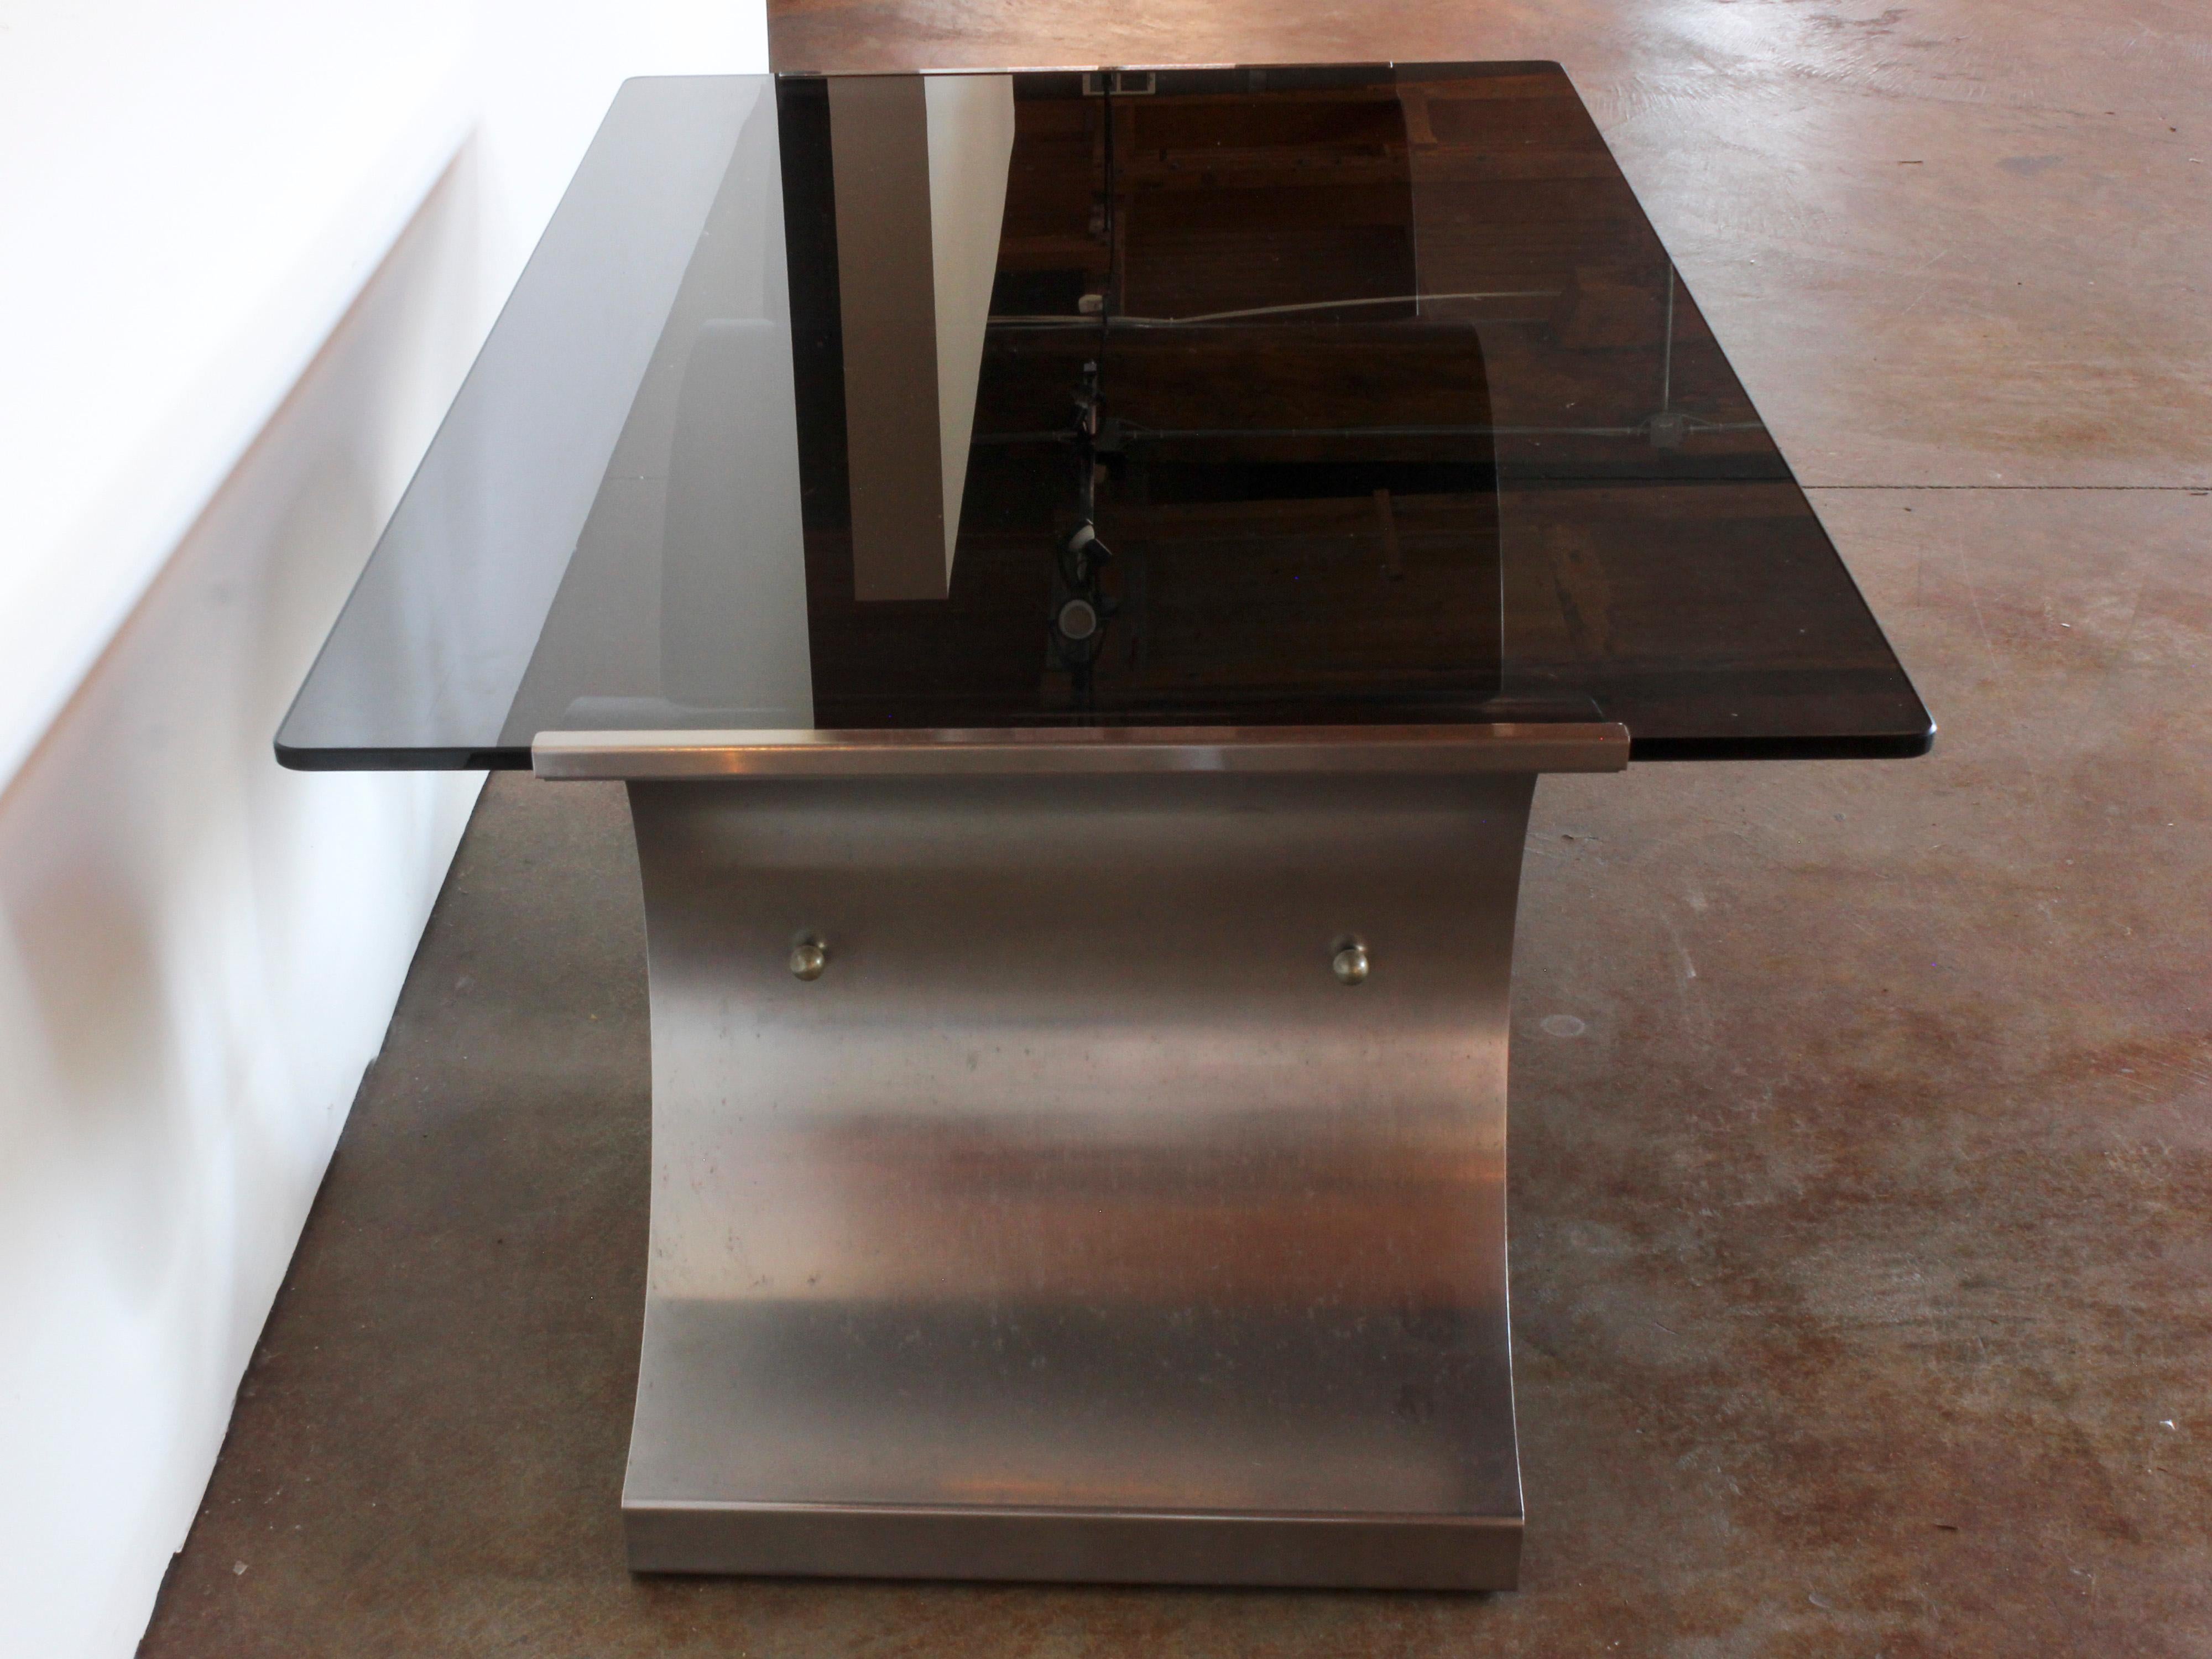 Steel and Glass Coffee Table by Francois Monnet for Kappa, French, c. 1970 In Good Condition For Sale In Chicago, IL